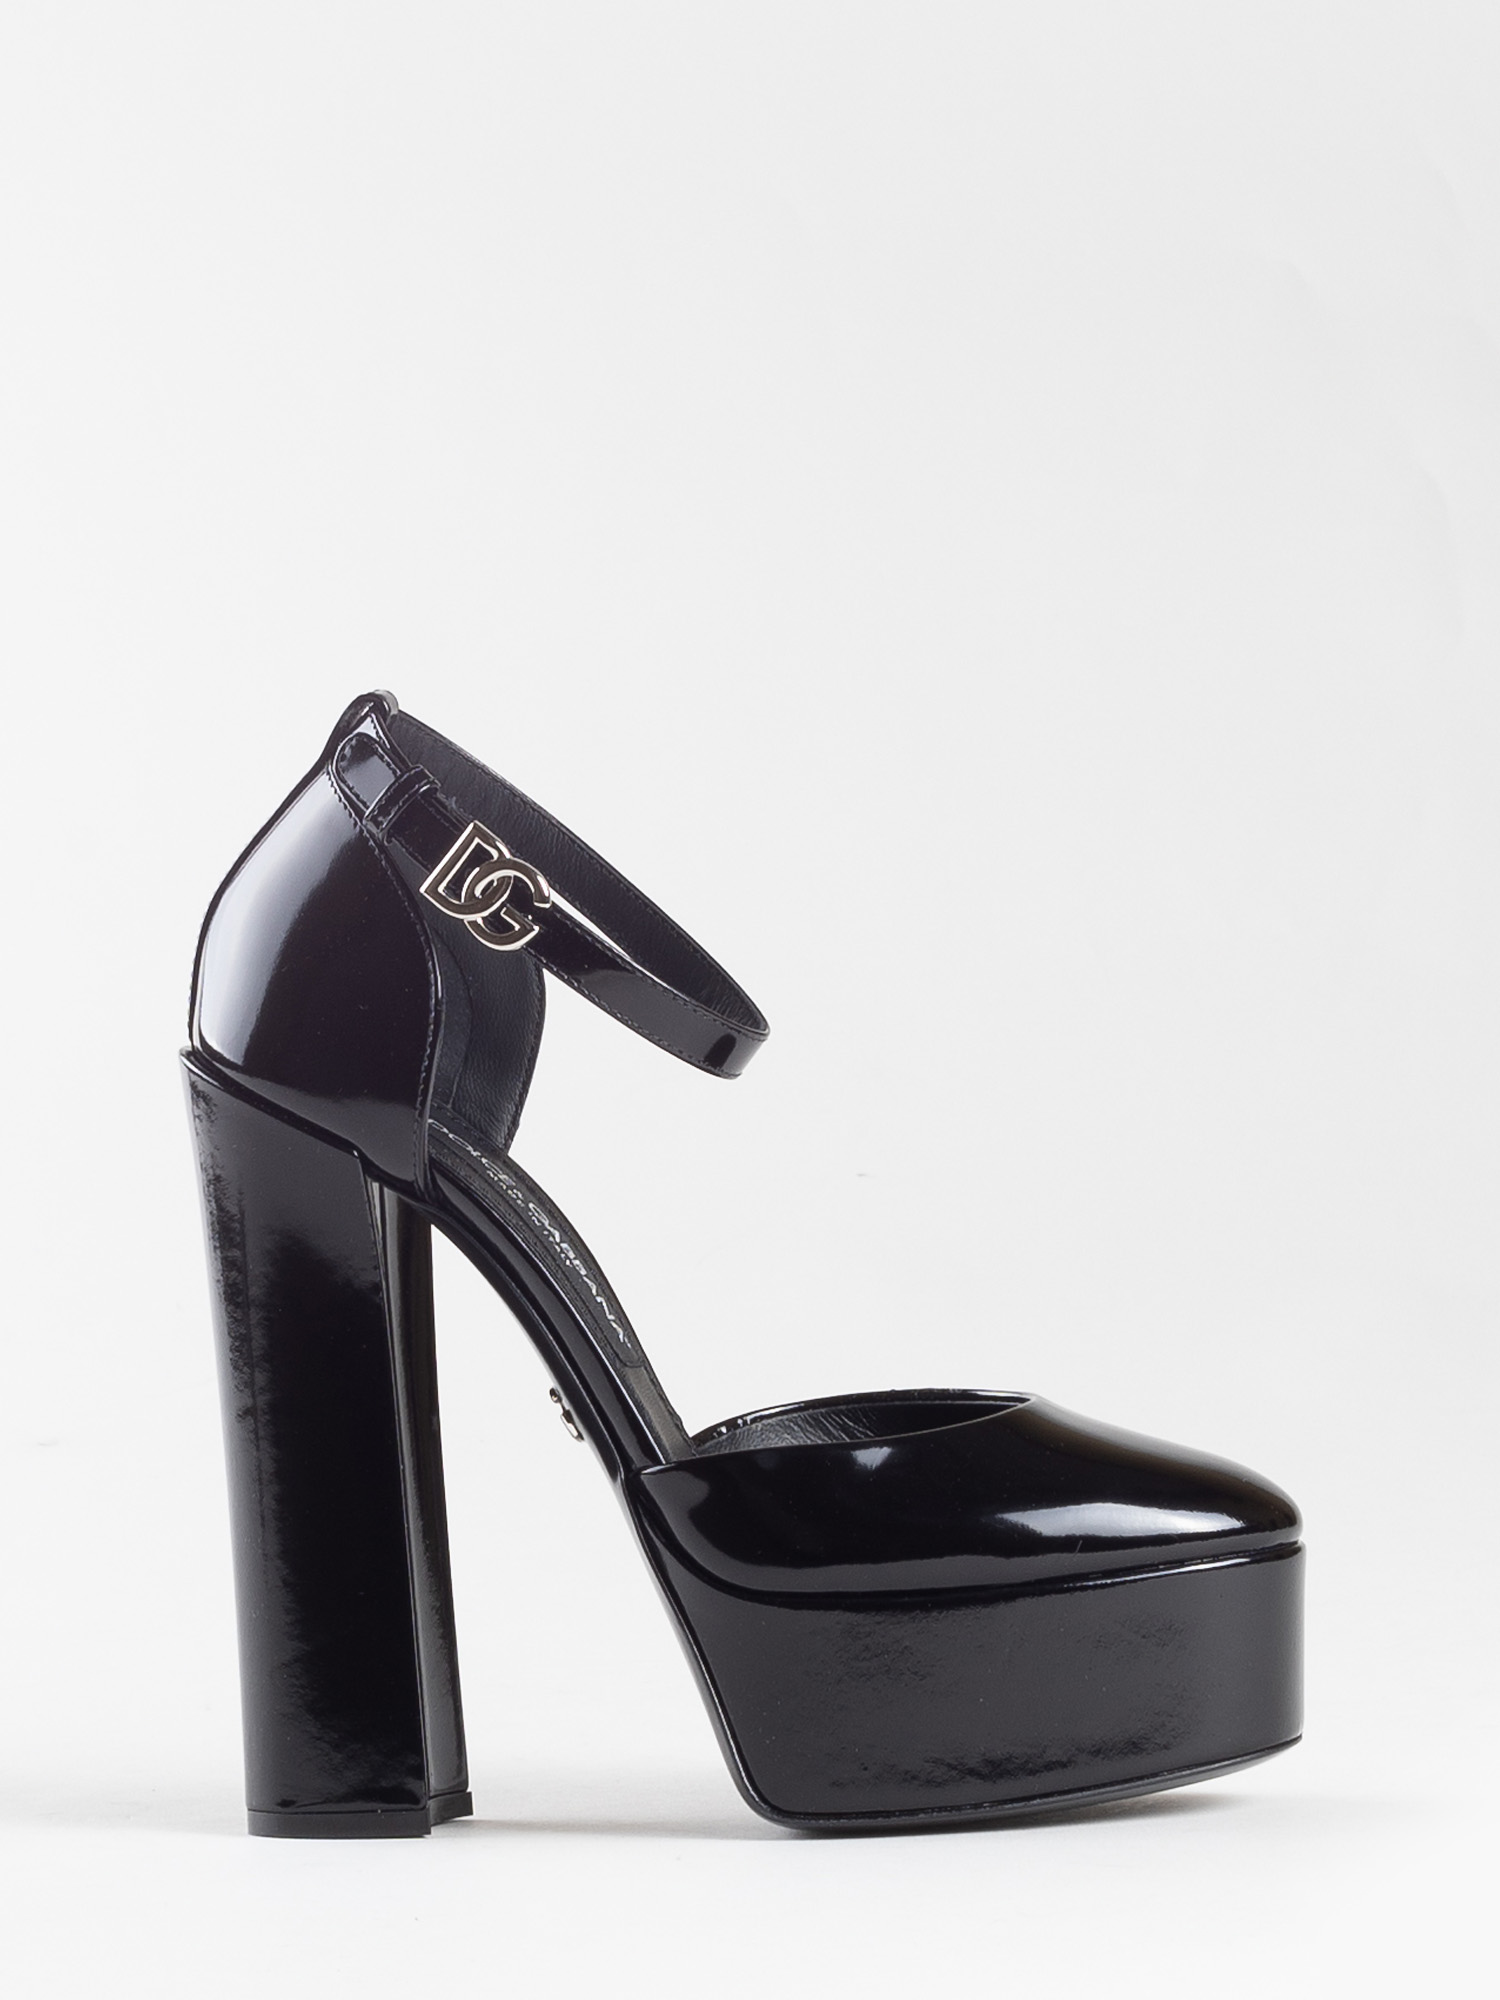 GLOSSY LEATHER SANDALS - DOLCE & GABBANA